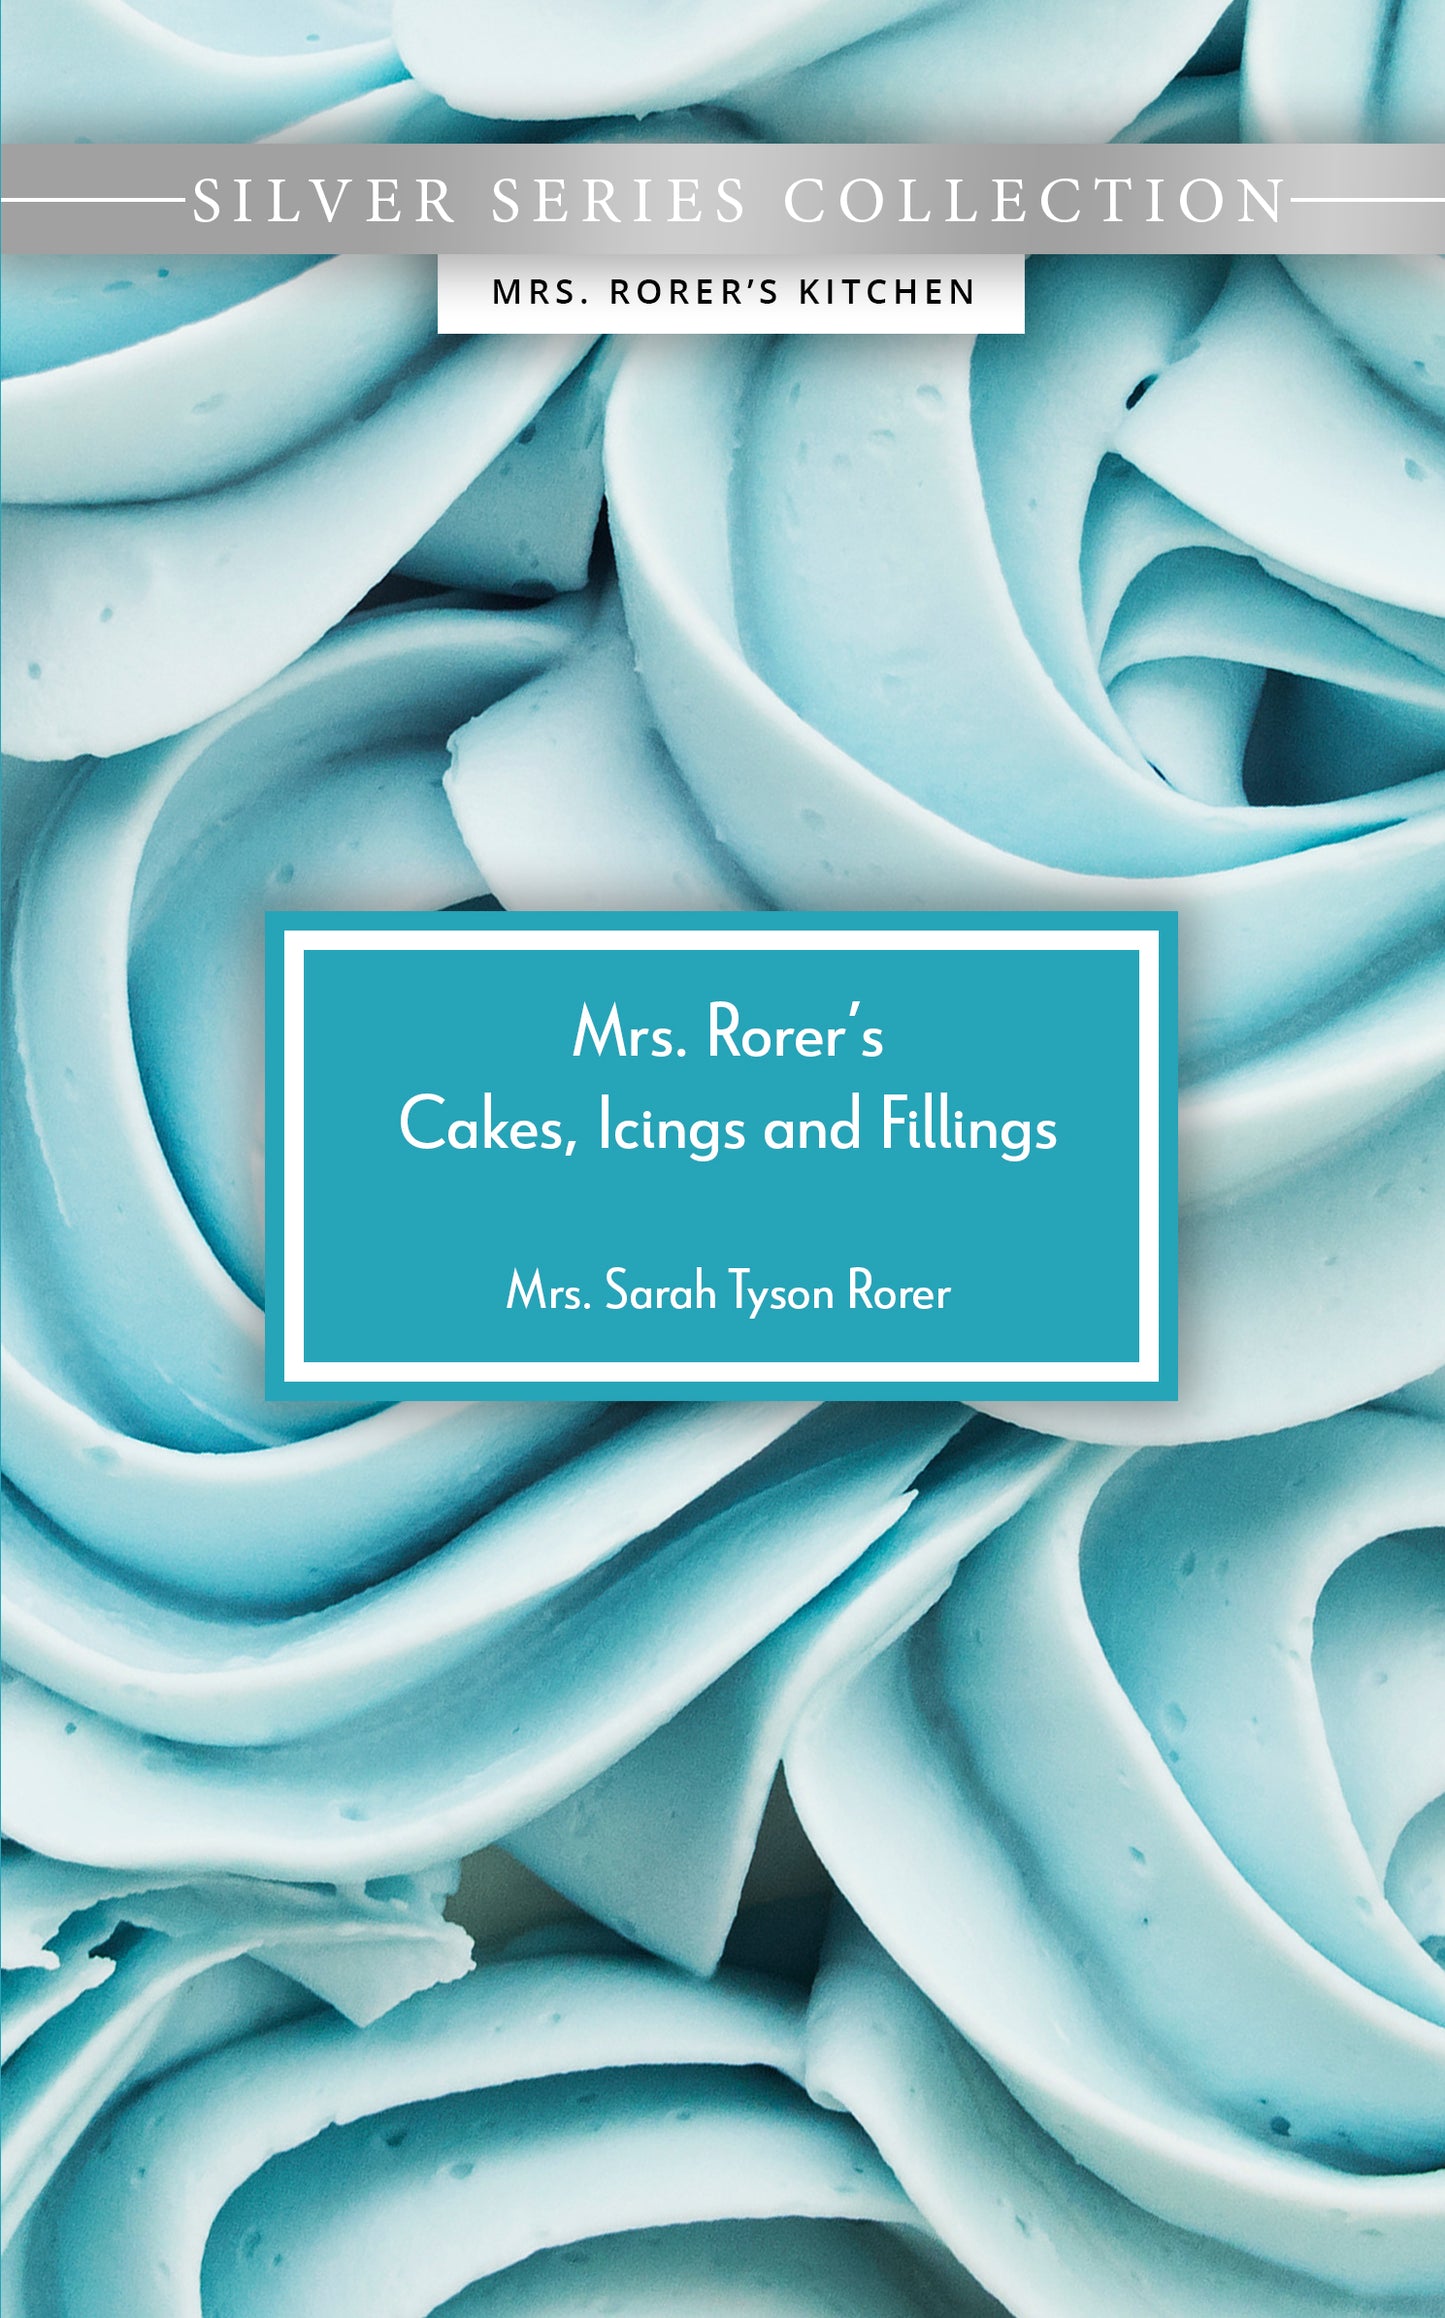 Mrs. Rorer's Cakes, Icings, and Fillings